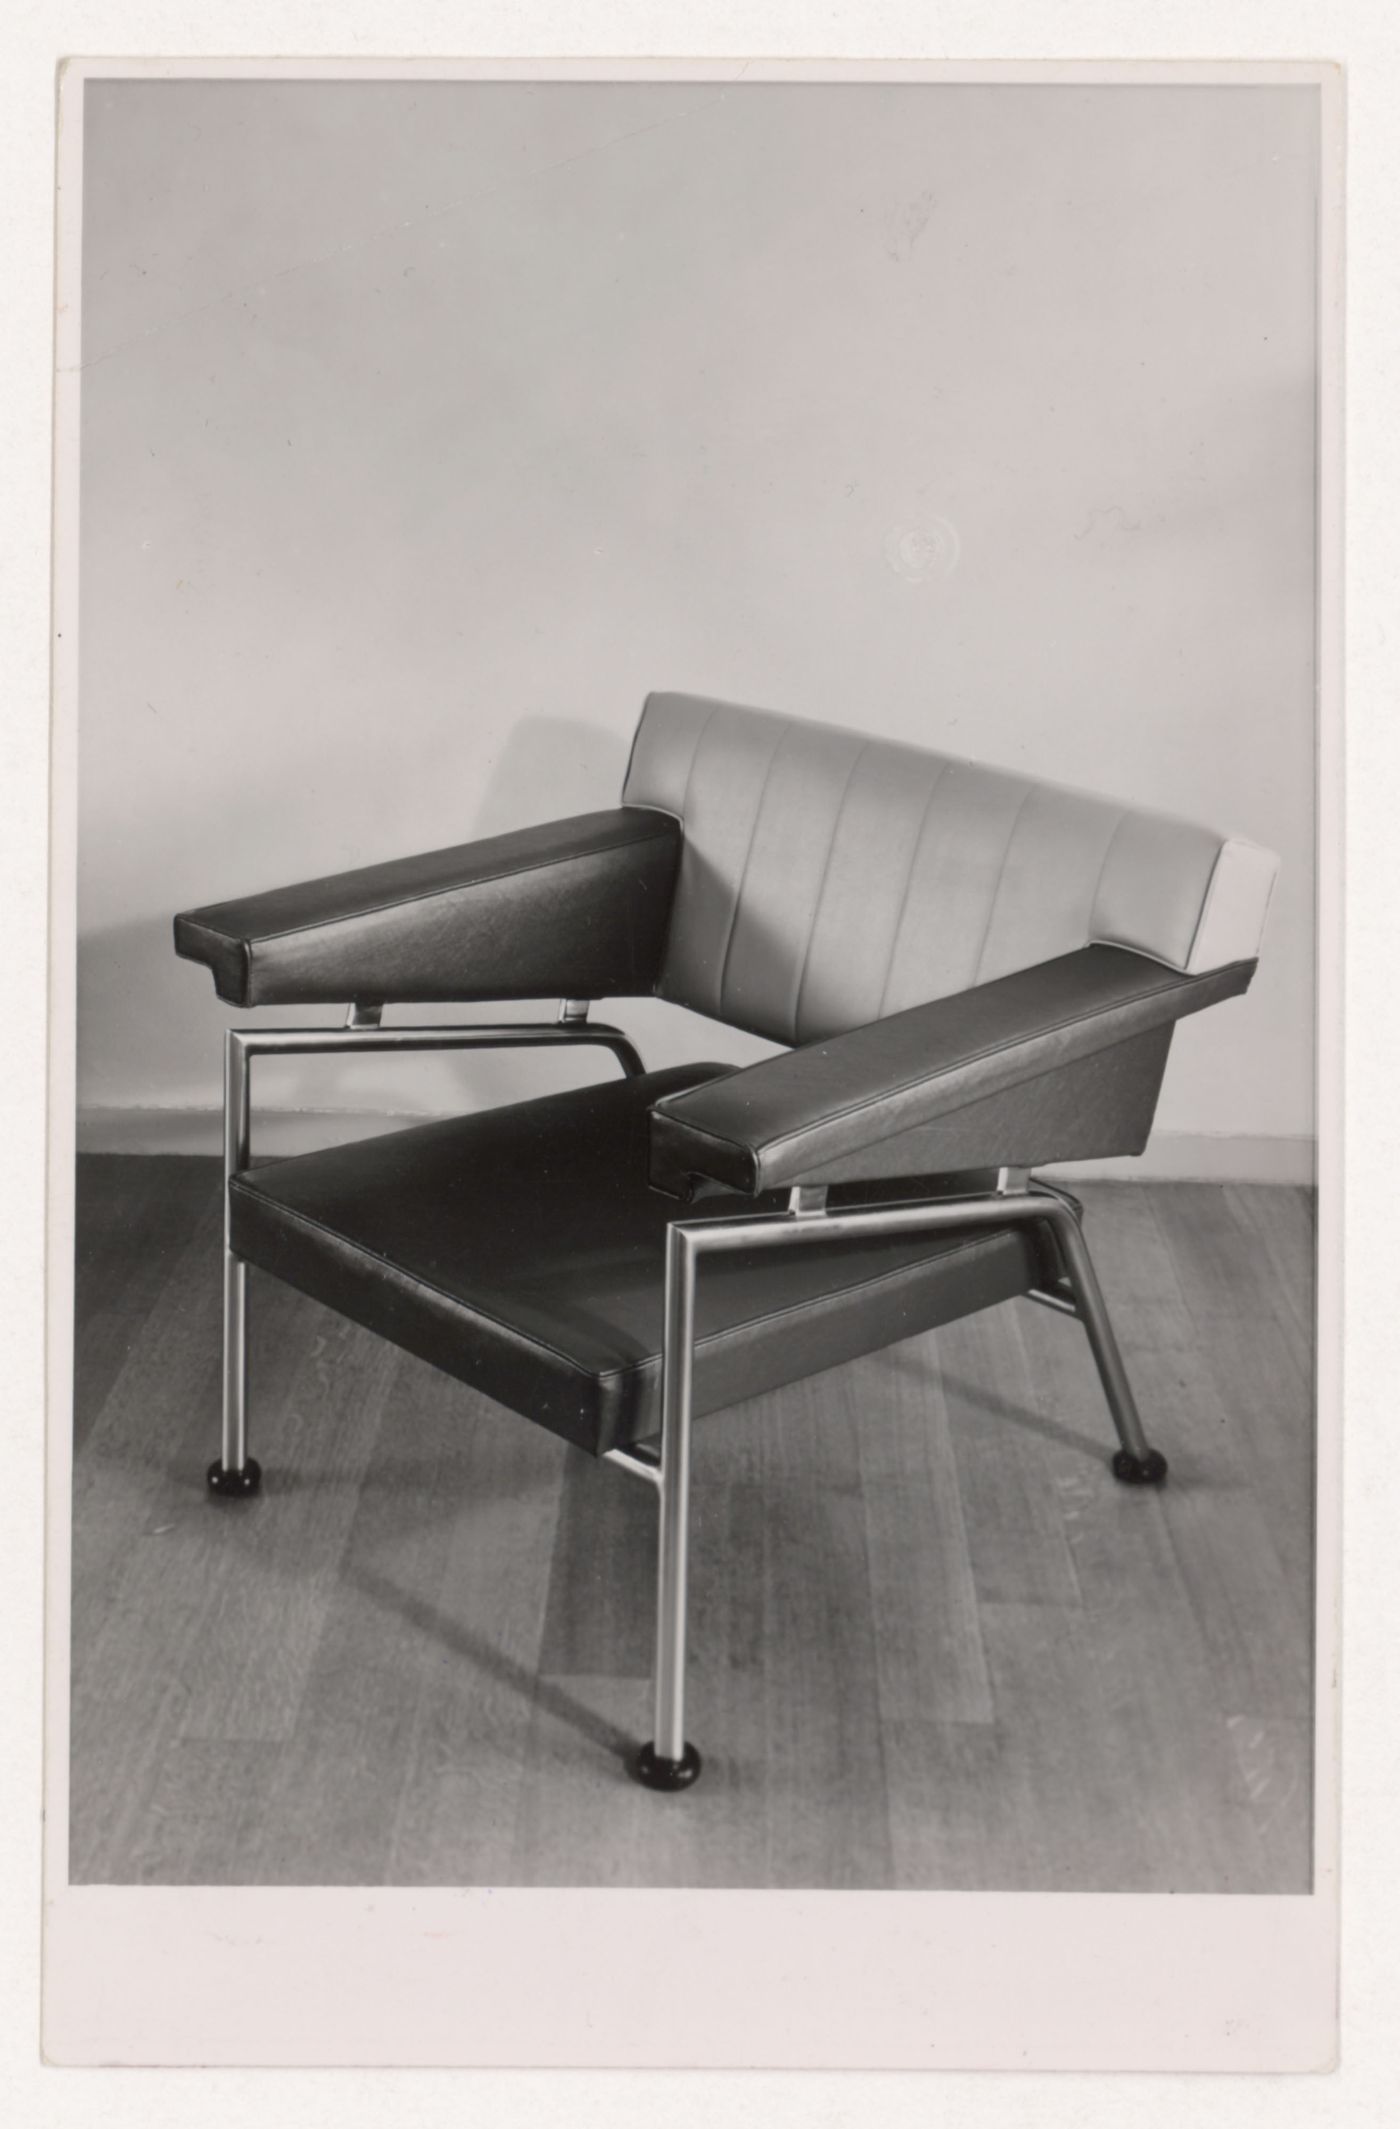 View of an armchair designed by J.J.P. Oud for the Central Savings Bank, Rotterdam, Netherlands